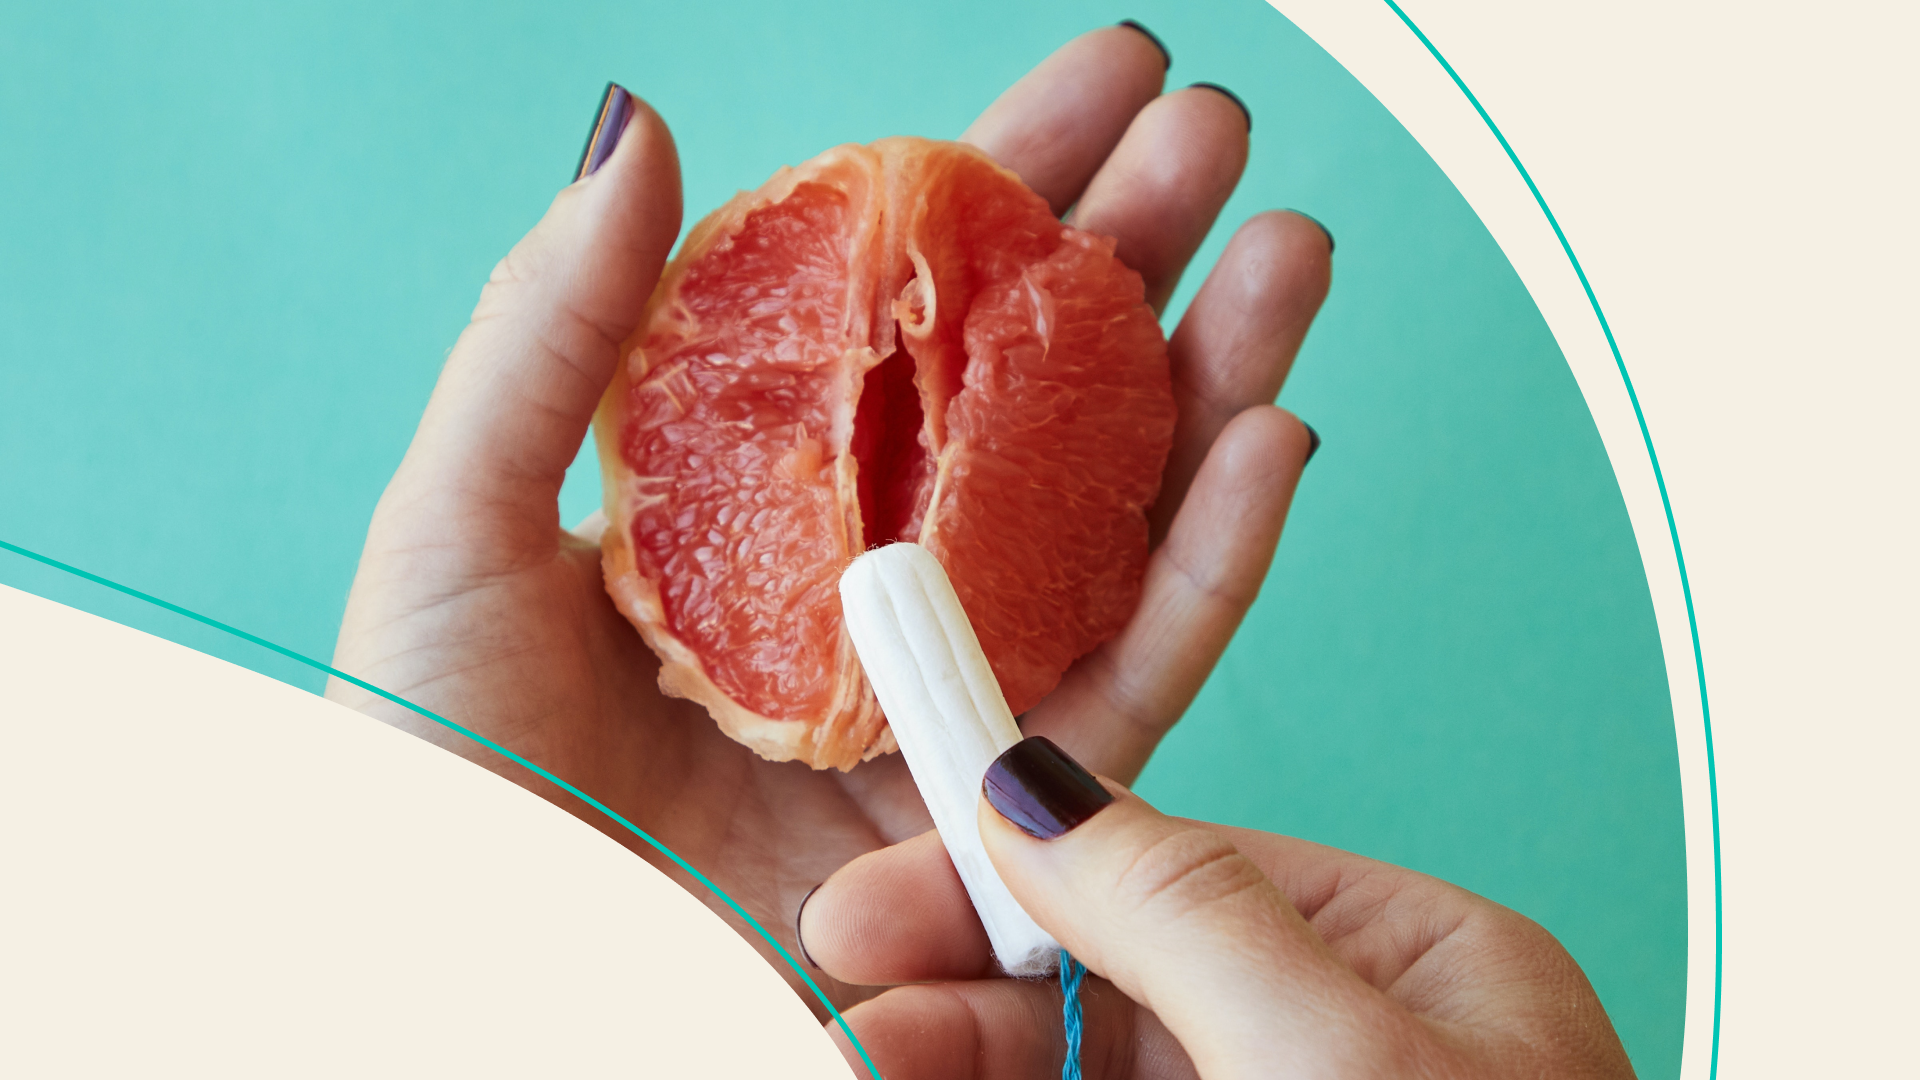 A person holding a grapefruit and pointing a tampon at it